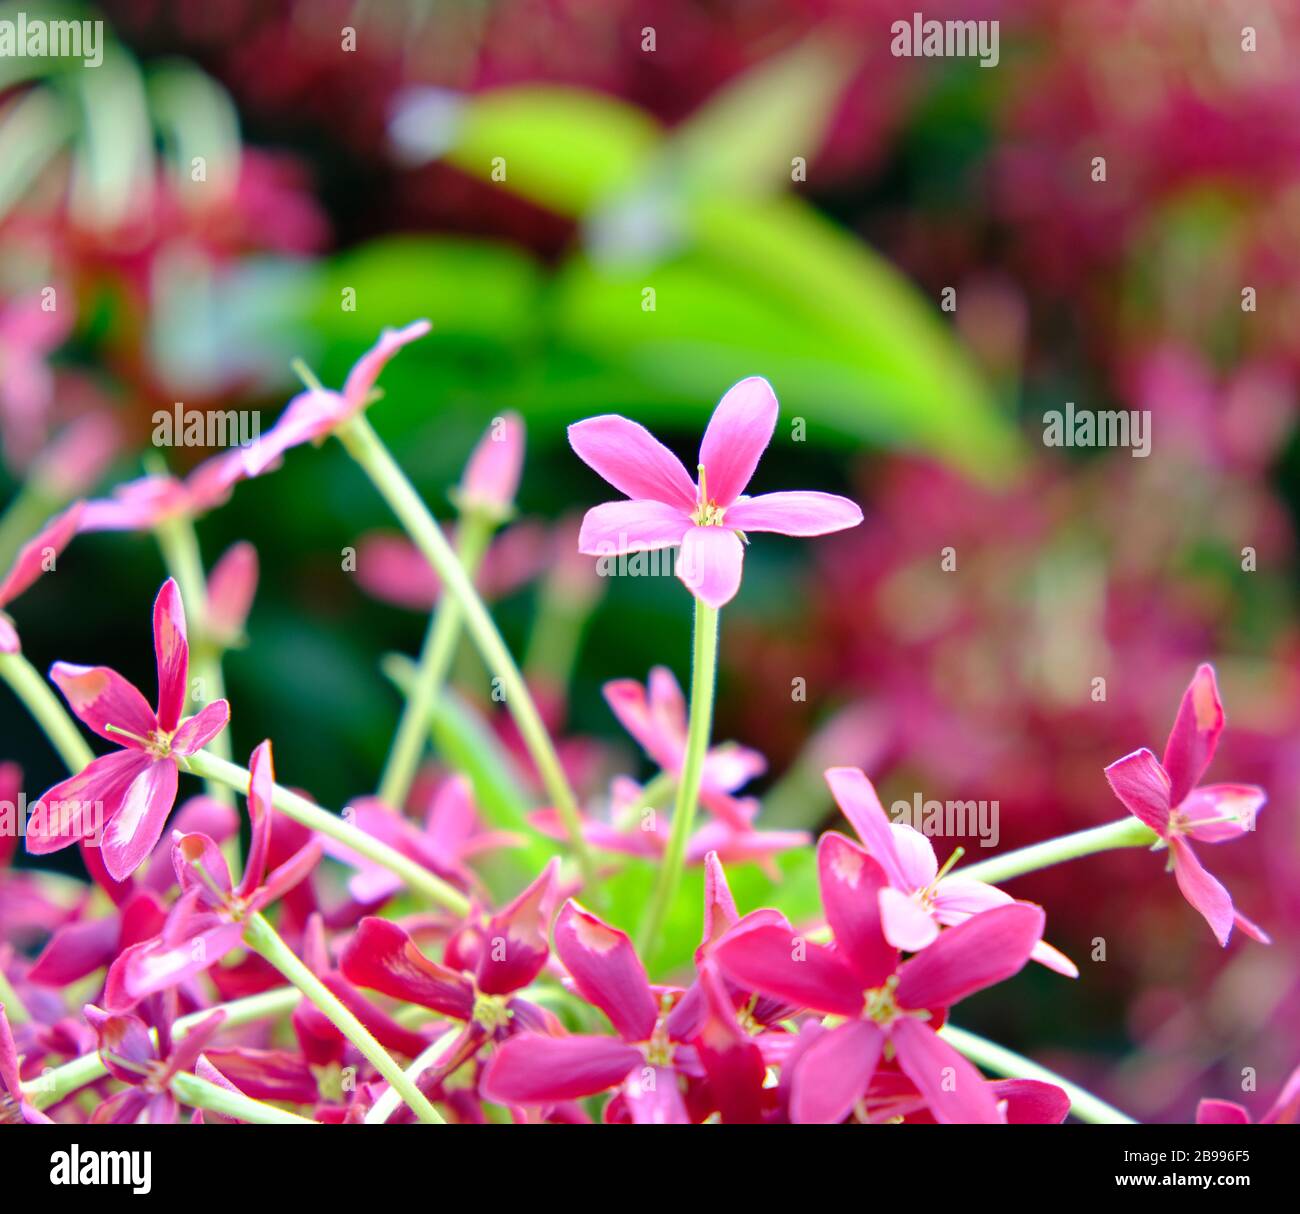 Delicate pink flowers on blurred green background, season in the garden: (Combretum indicum). Stock Photo